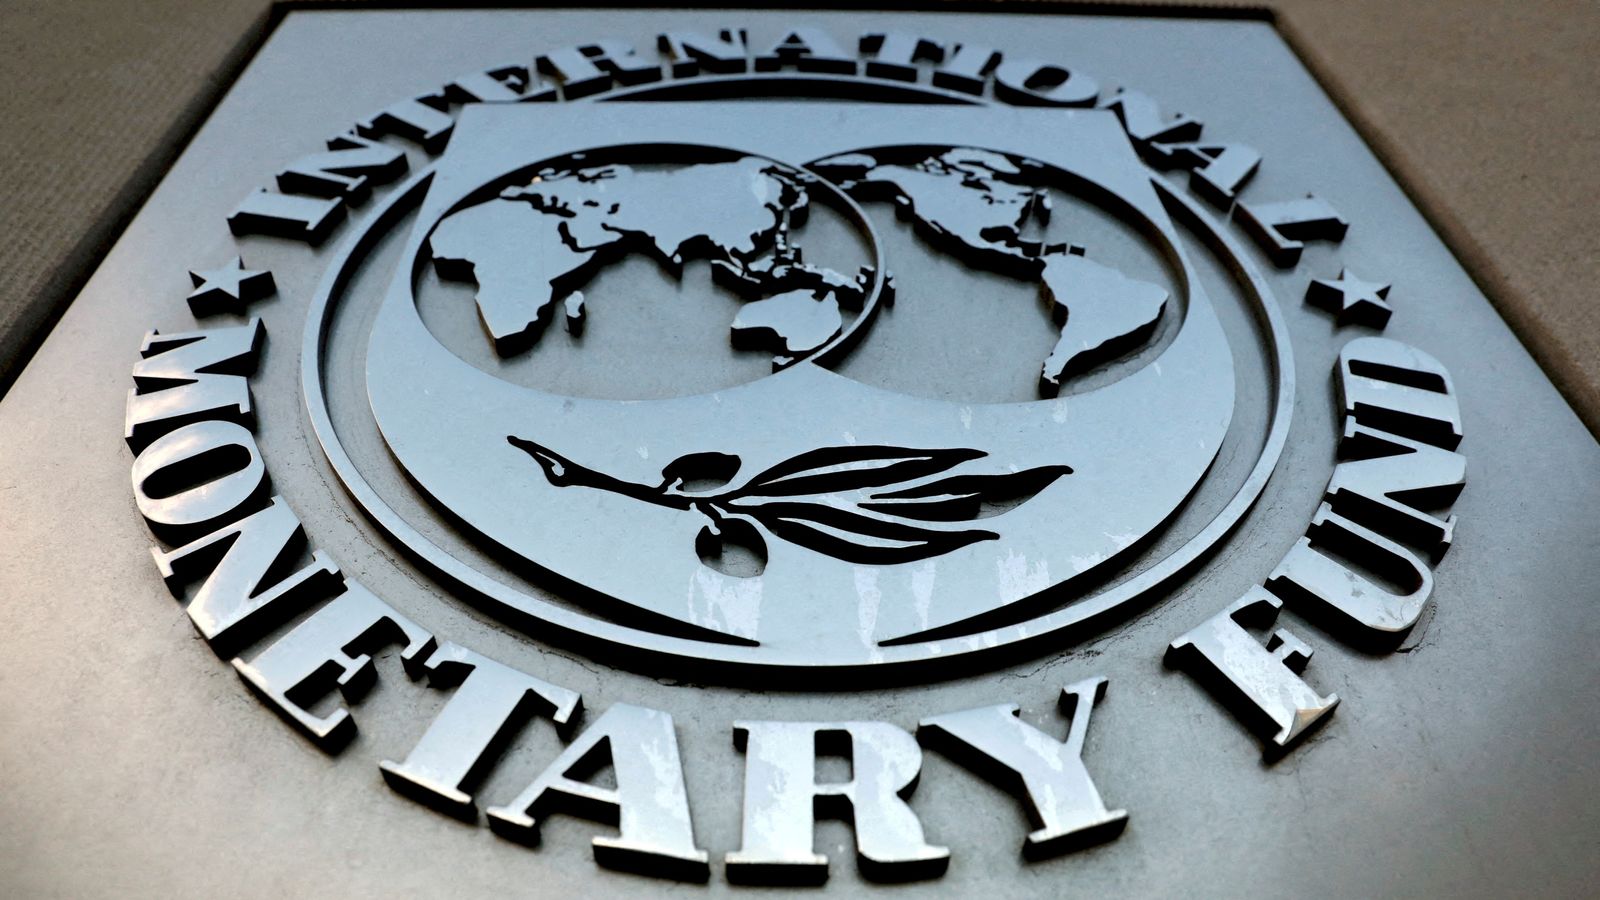 Ultra-low interest rates set to return, IMF says